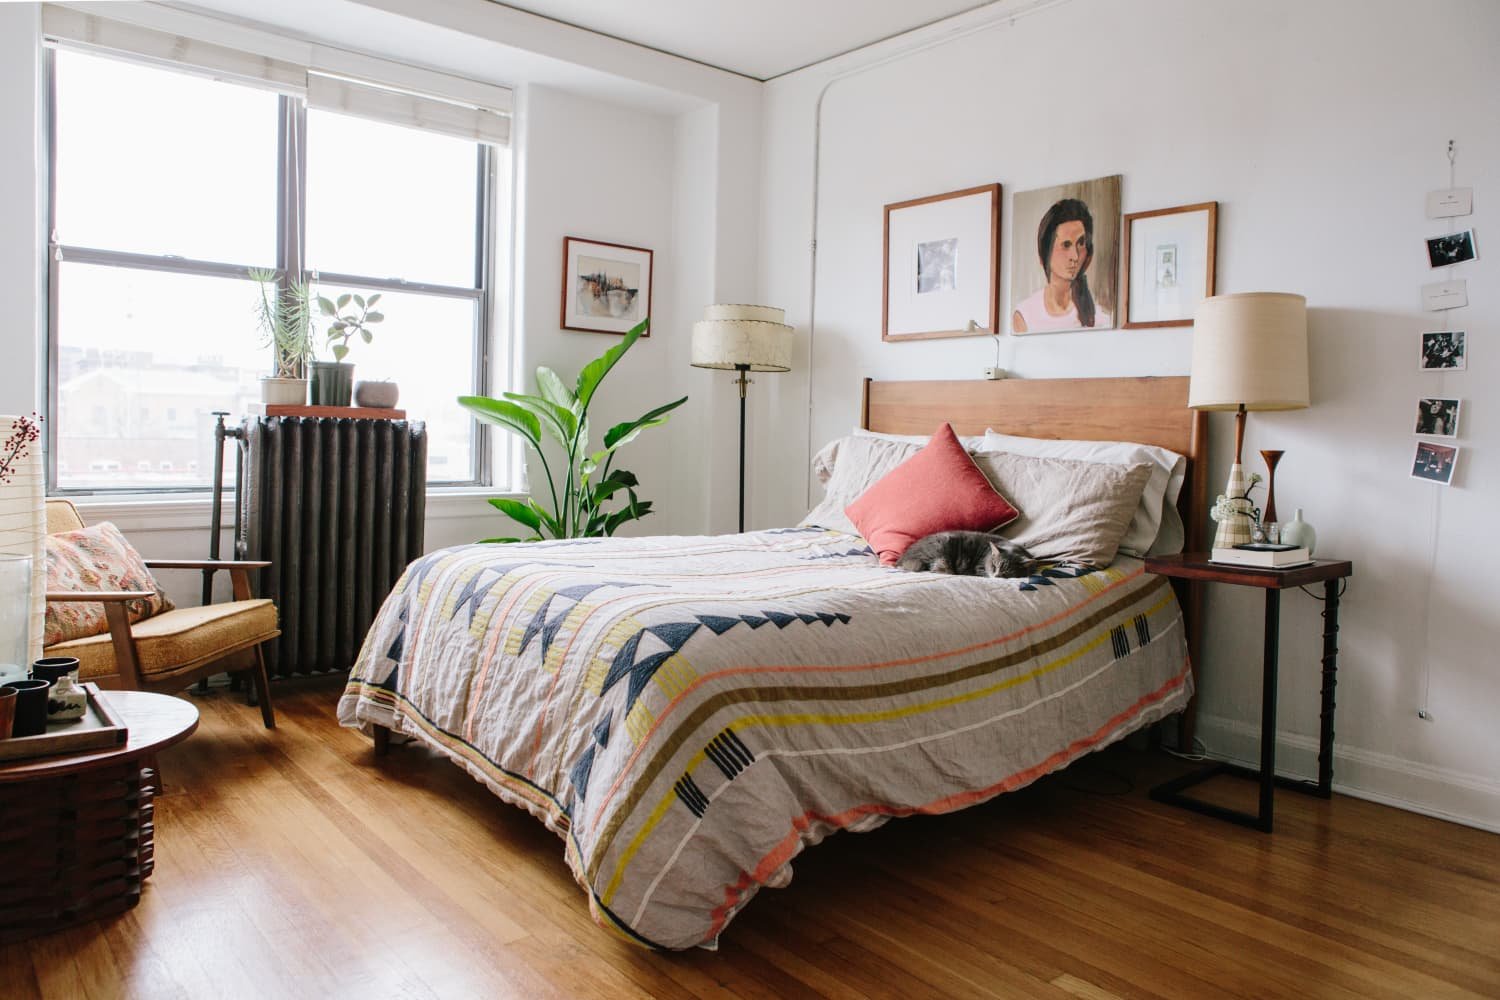 Your Bedroom Window Needs a Deep Clean — Here’s How to Do It